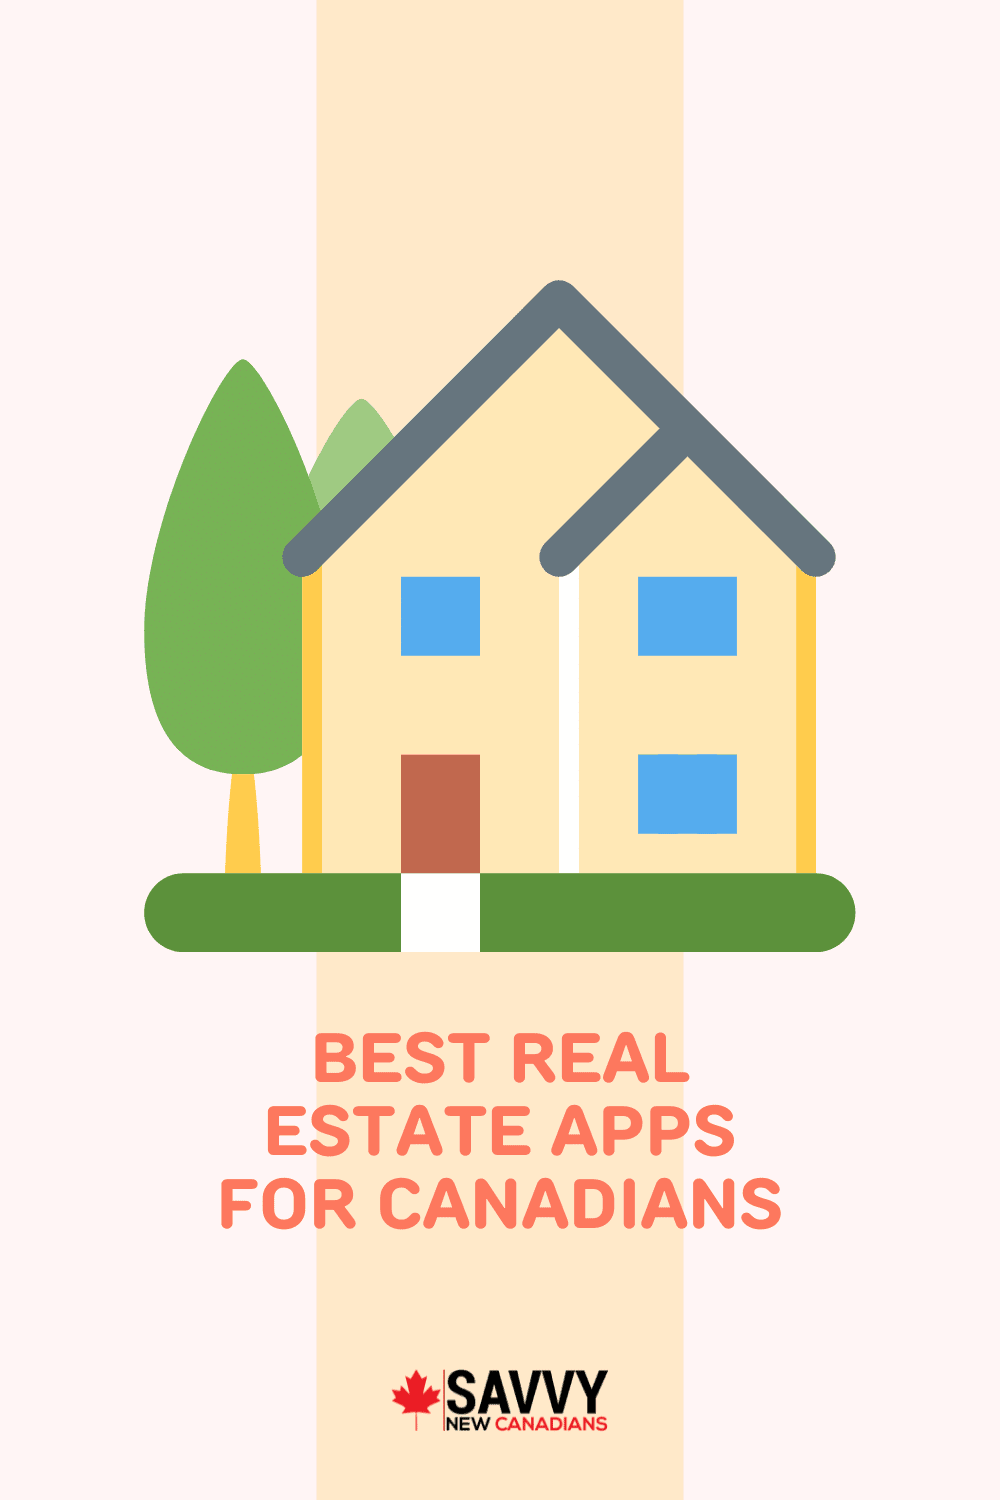 21 Best Real Estate Apps For Canadians in 2022